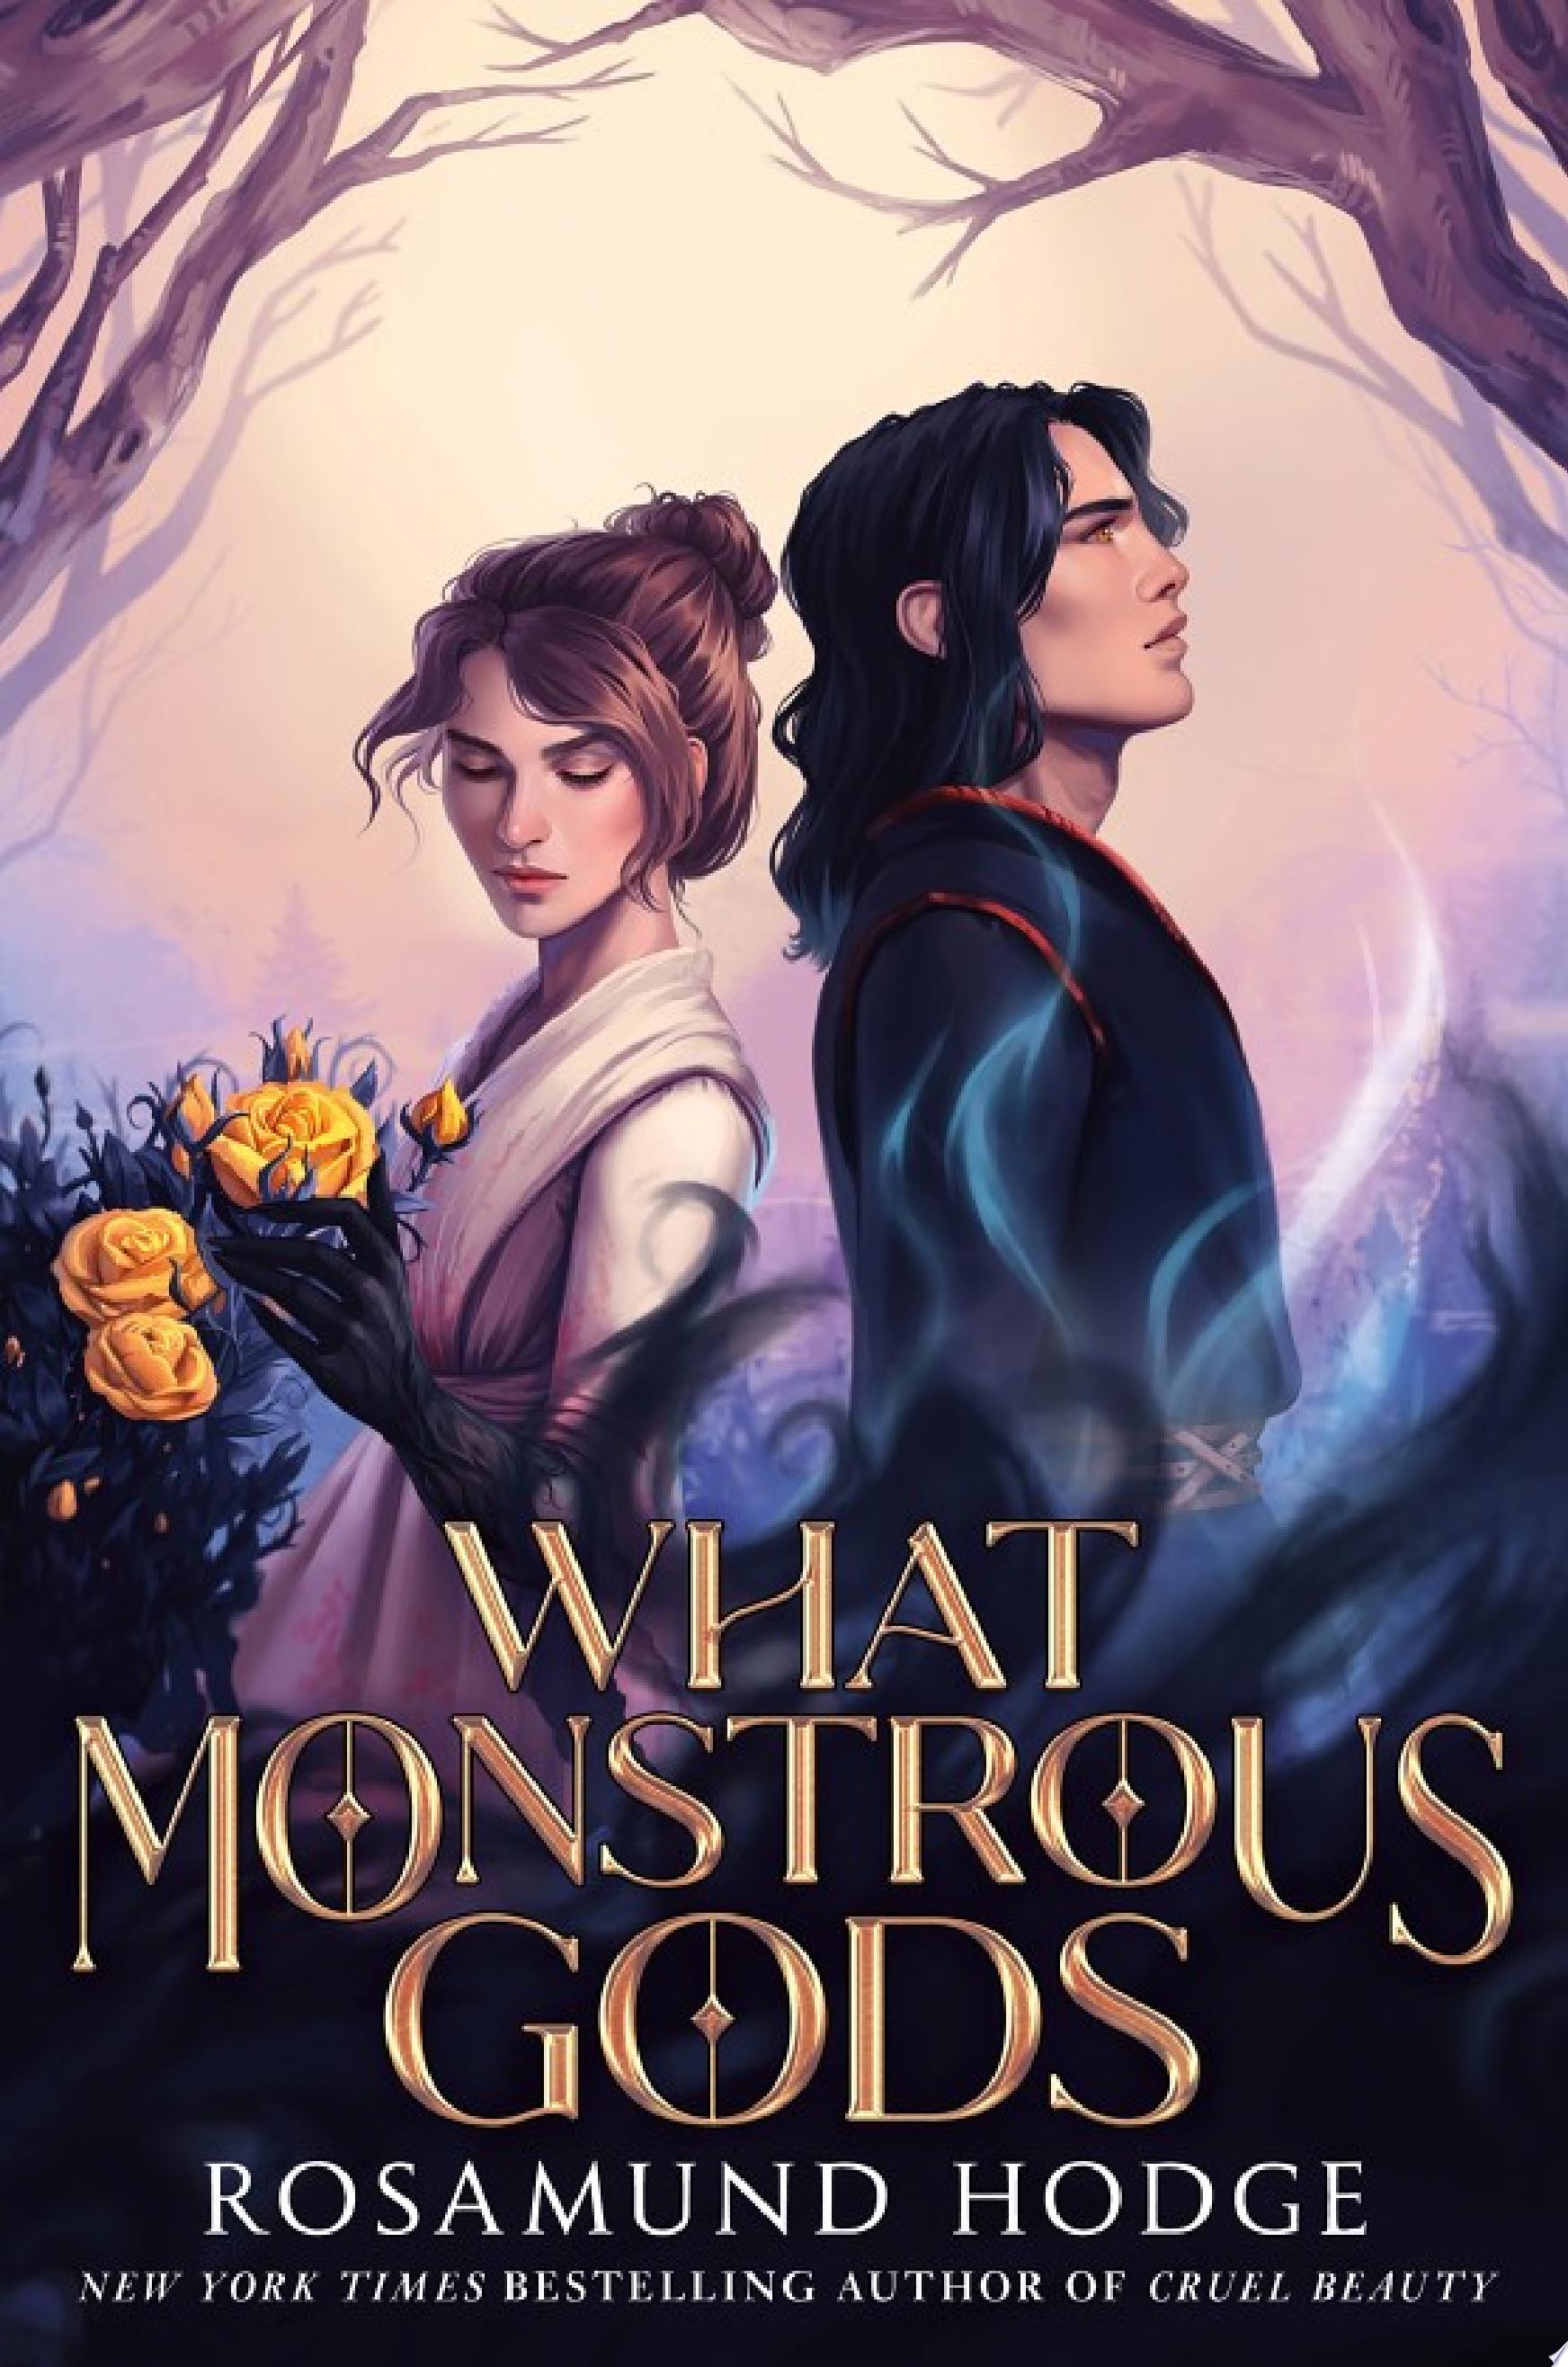 Image for "What Monstrous Gods"